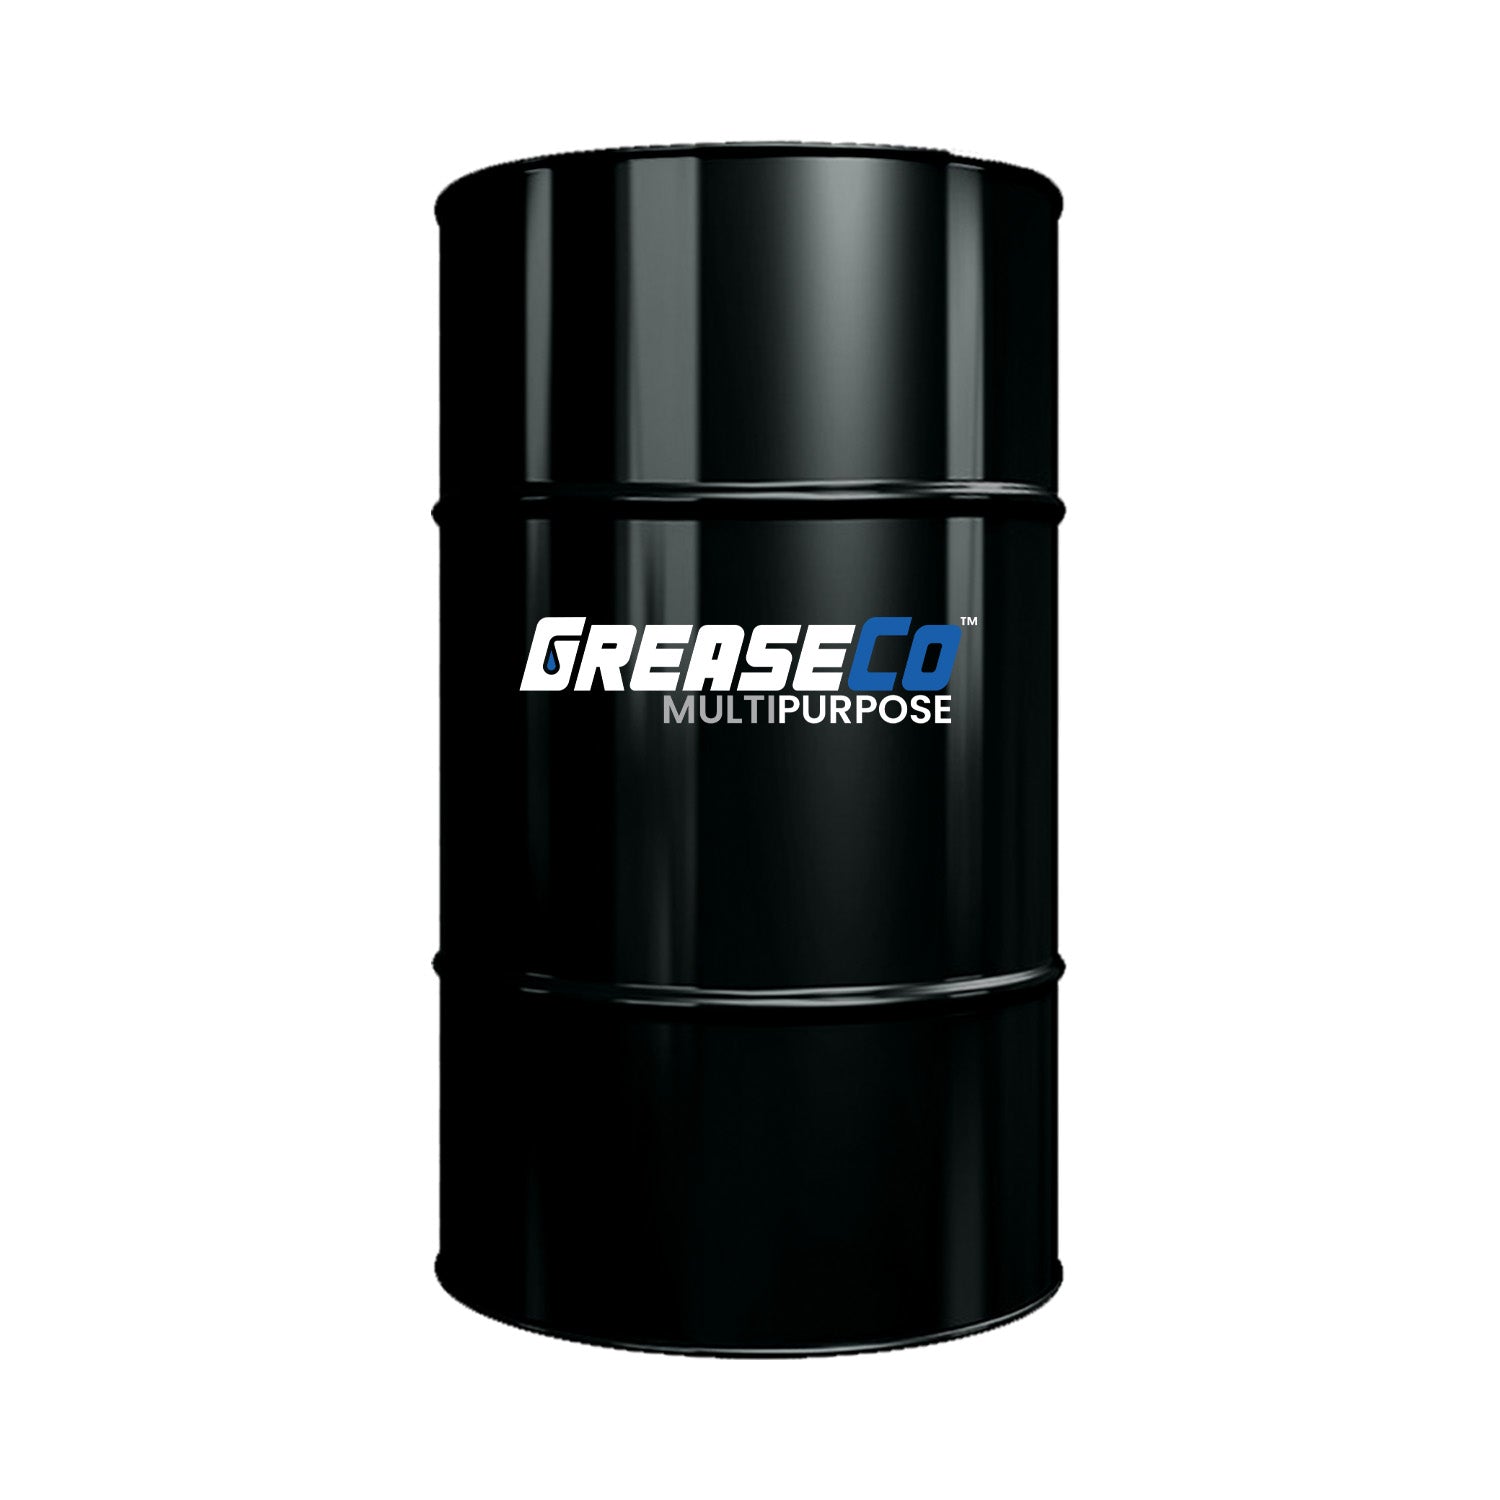 Lithium Complex Temp High Performance Grease 120 LB Keg of GreaseCo MultiPurpose